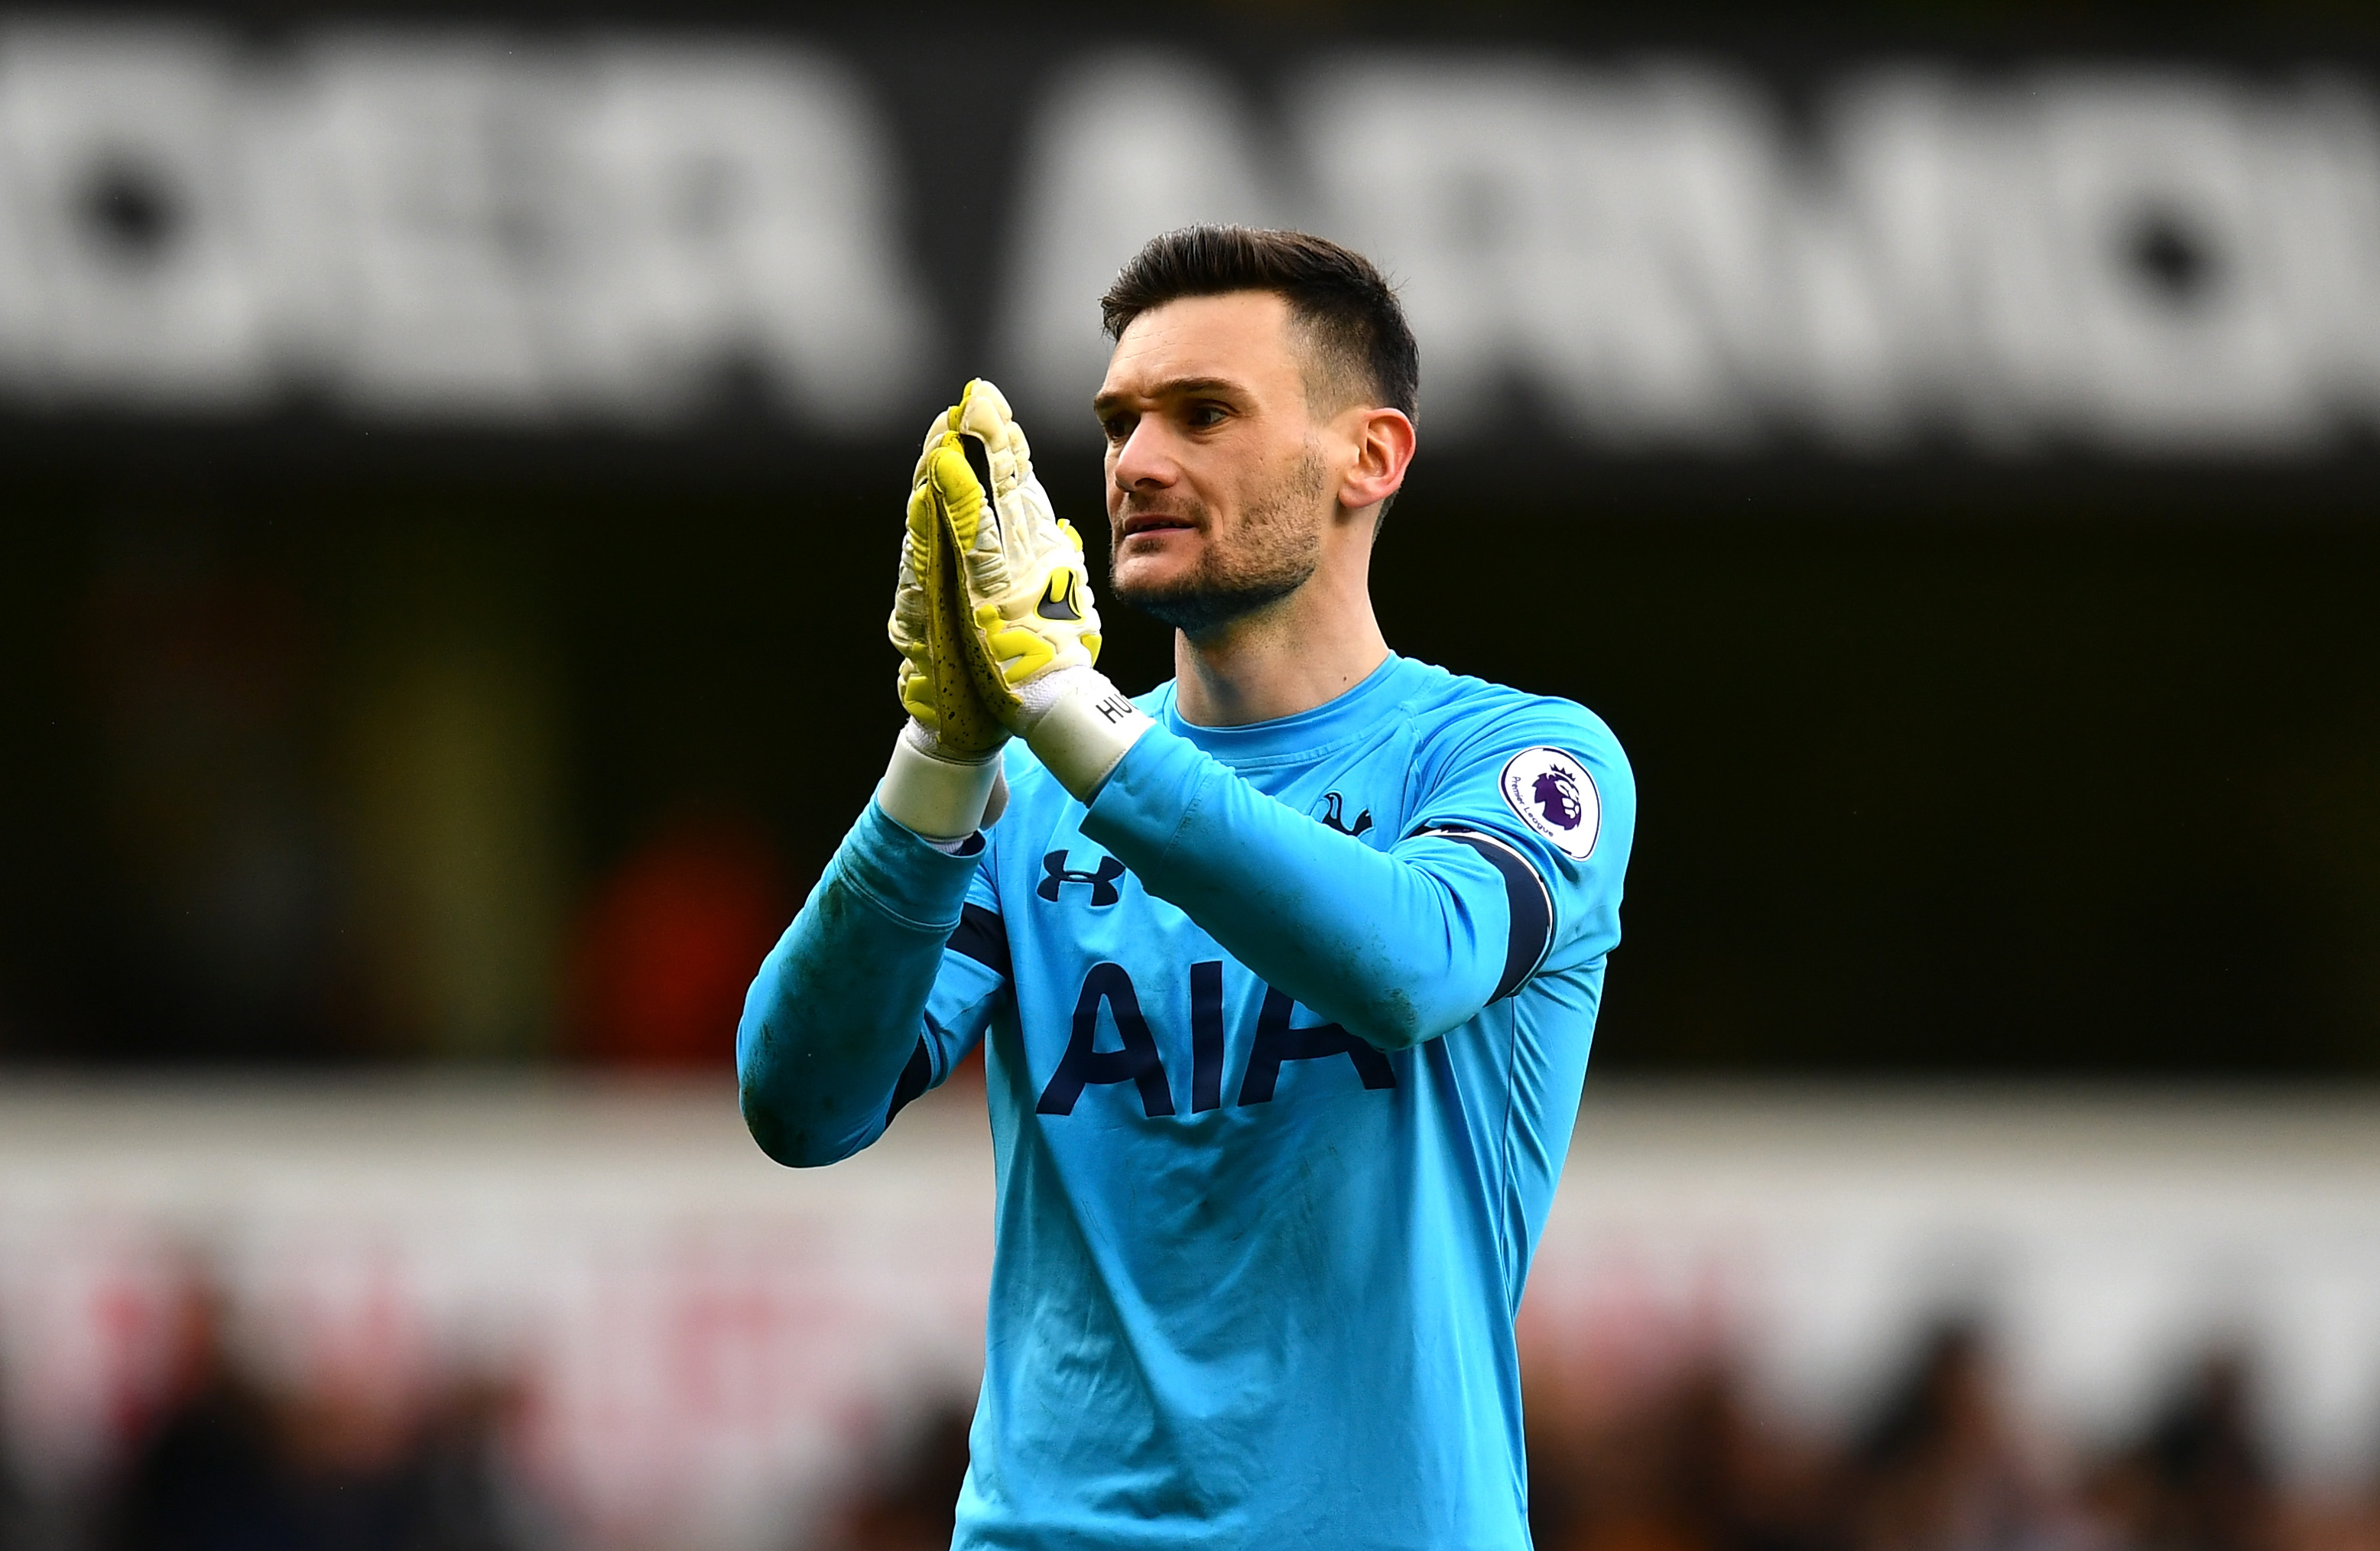 LONDON, ENGLAND - MARCH 05:  Hugo Lloris of Tottenham Hotspur celebrates after the final whistle during the Premier League match between Tottenham Hotspur and Everton at White Hart Lane on March 5, 2017 in London, England.  (Photo by Dan Mullan/Getty Images)